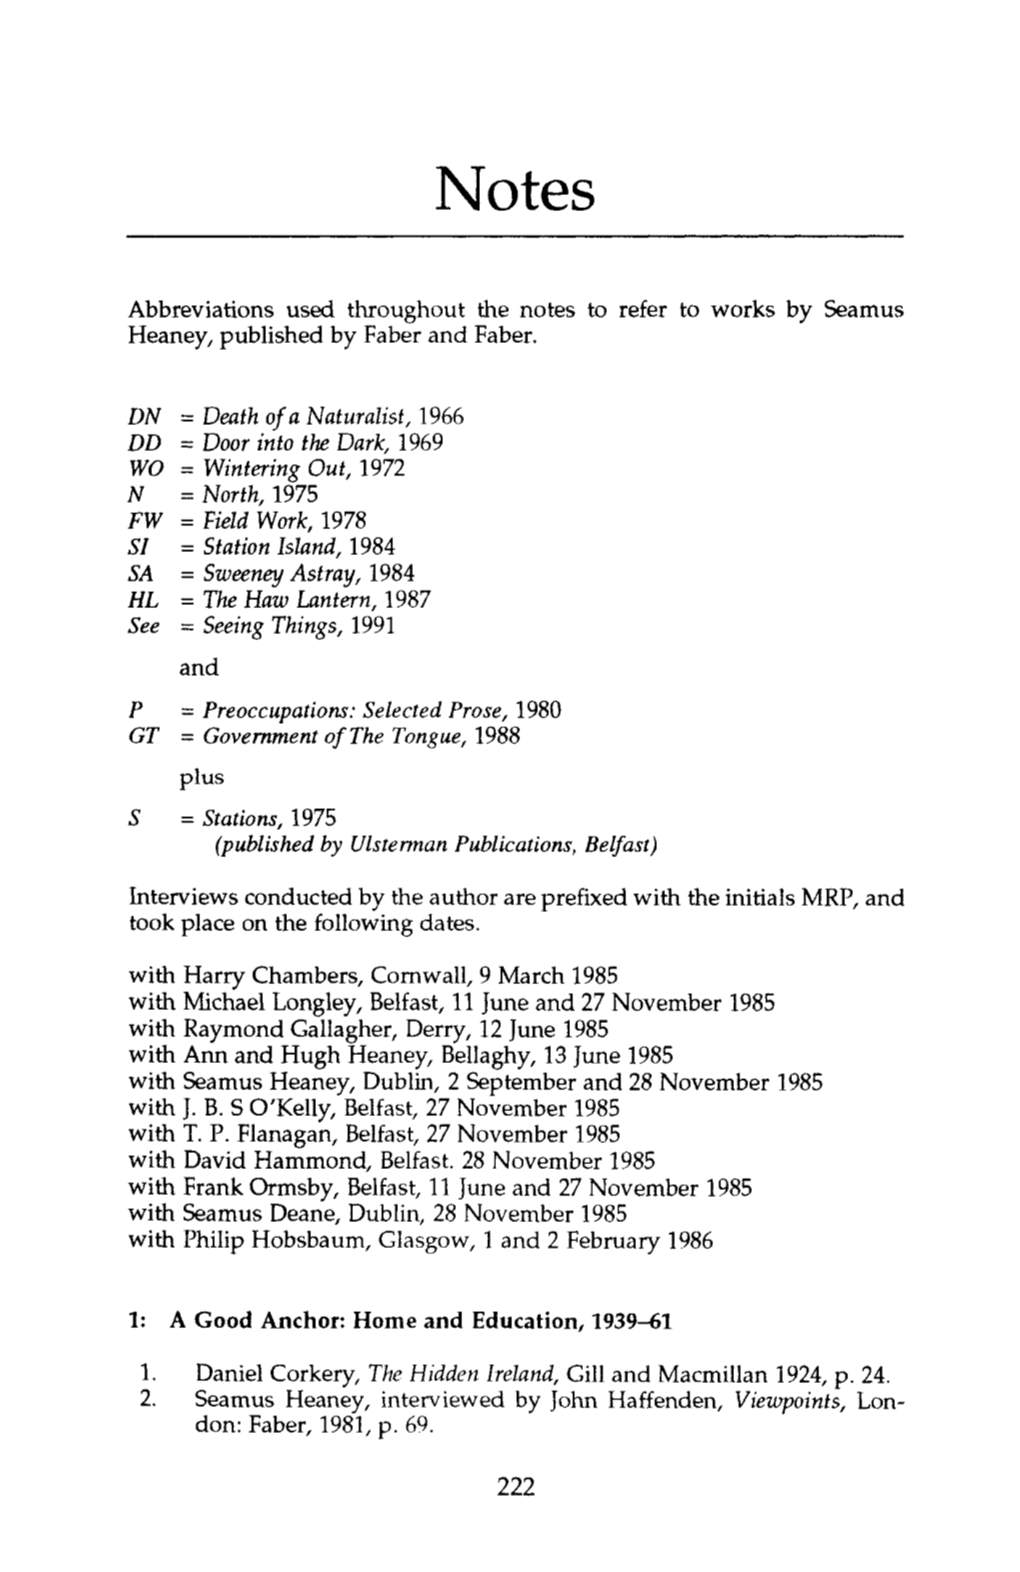 Abbreviations Used Throughout the Notes to Refer to Works by Seamus Heaney, Published by Faber and Faber